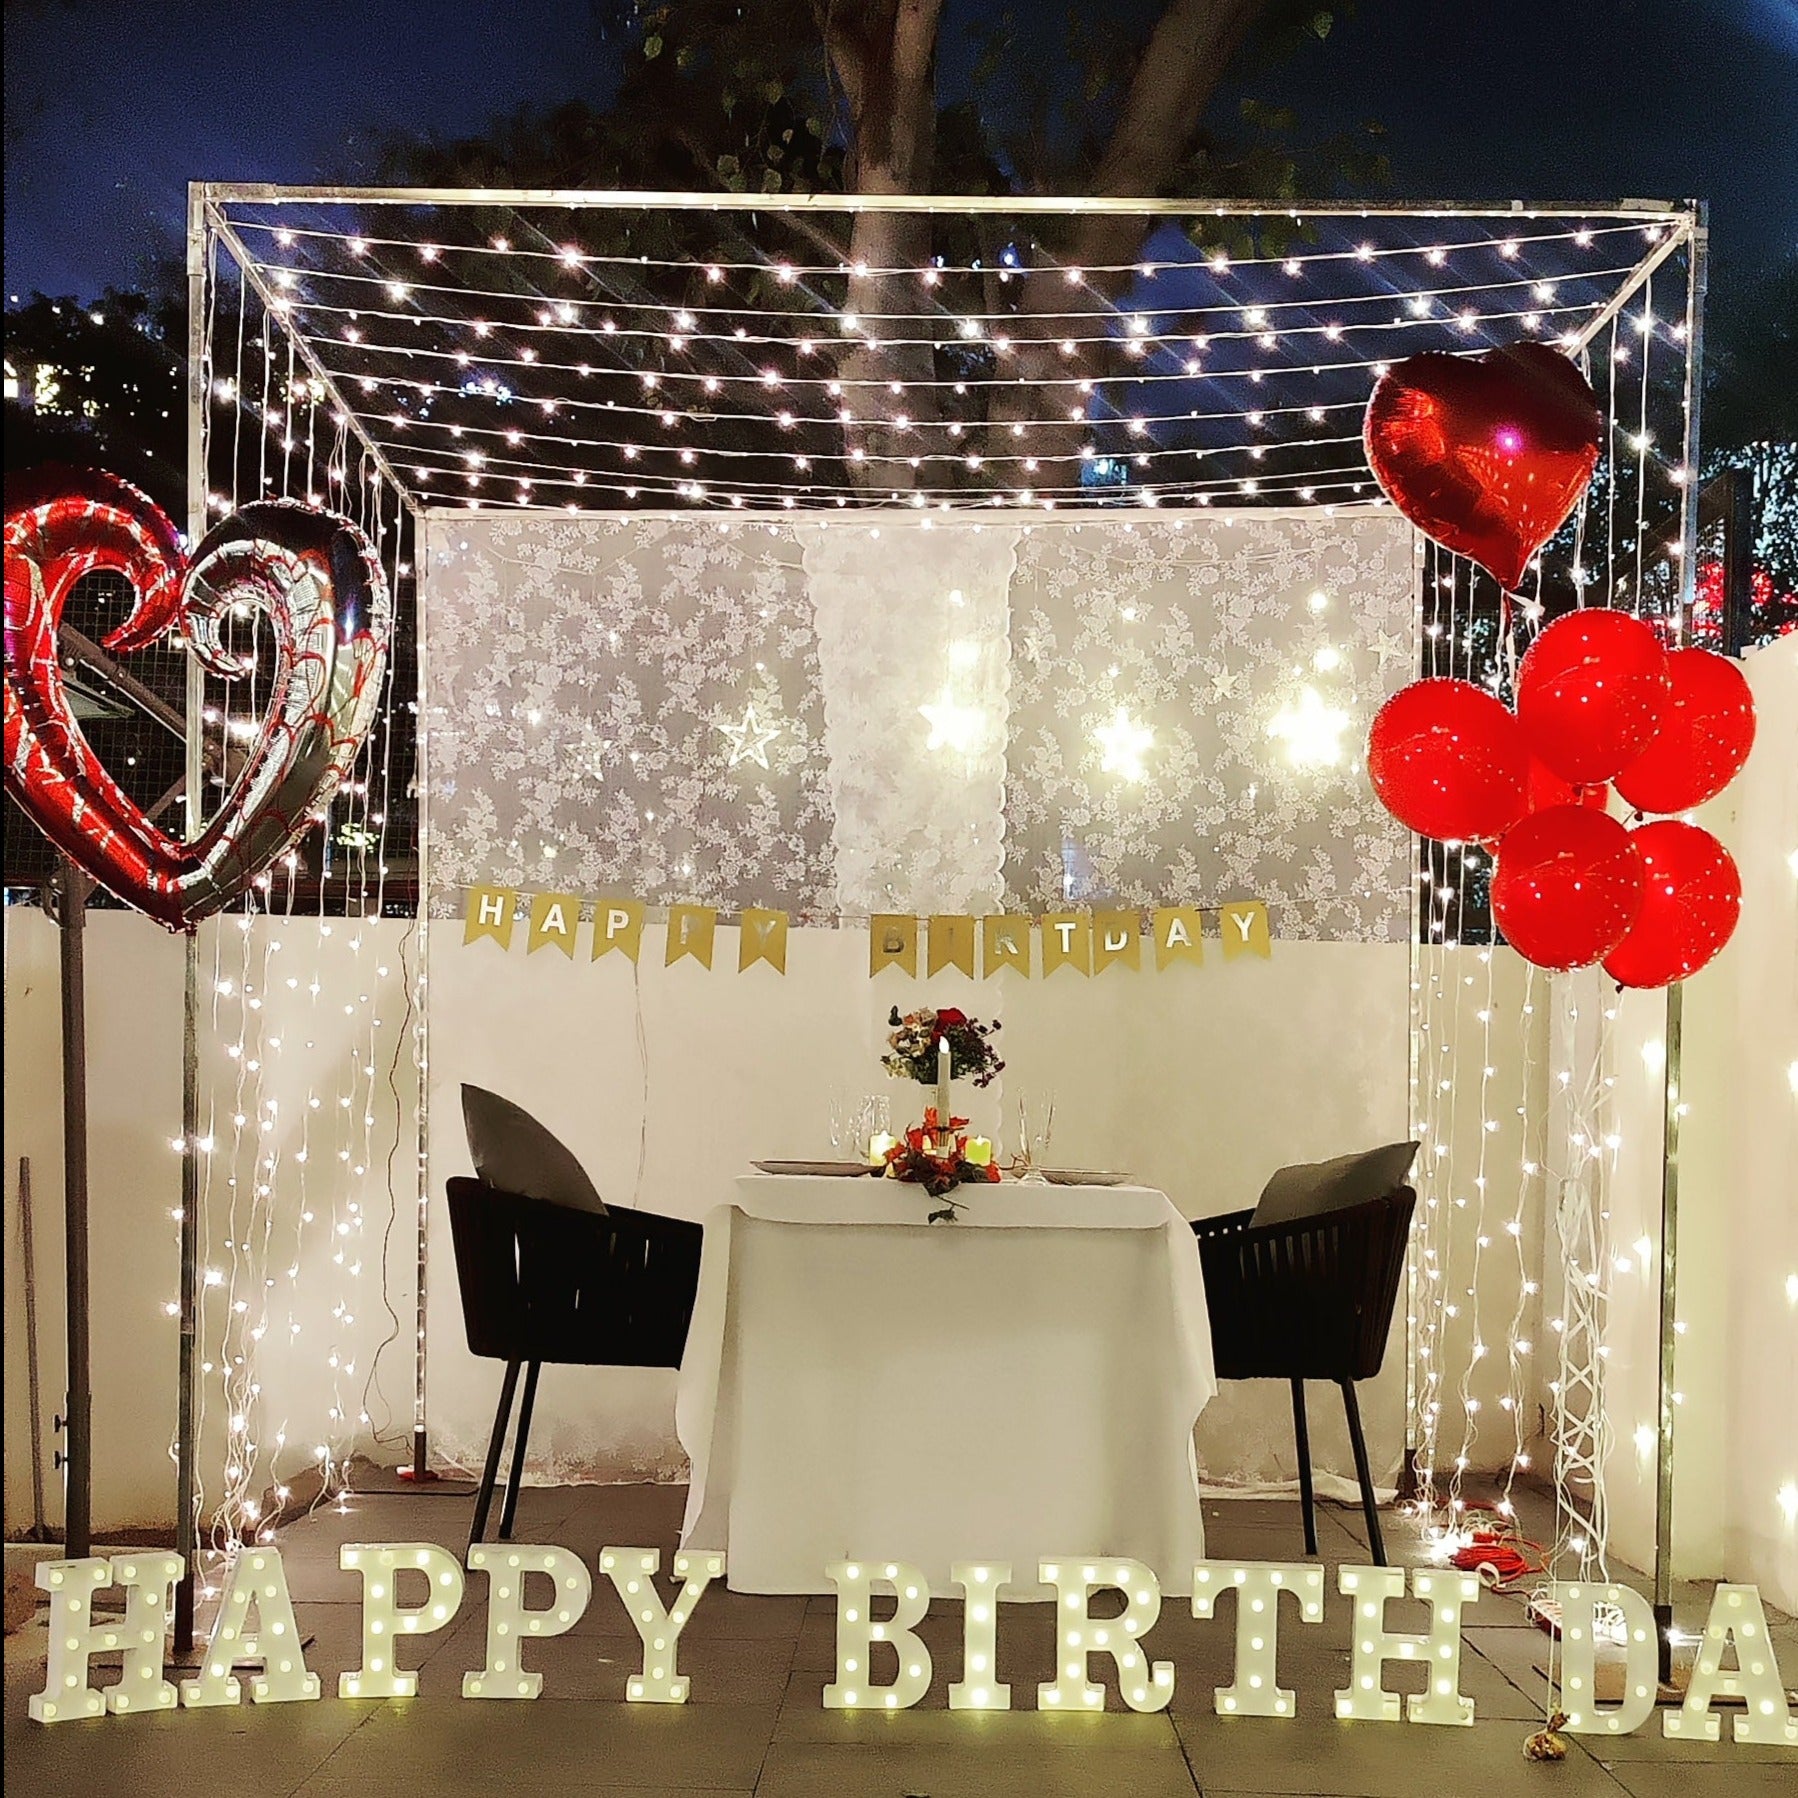 Premium Cabana Candle Light Dinner for Birthday, Anniversary Celebration by Miraculous Memories